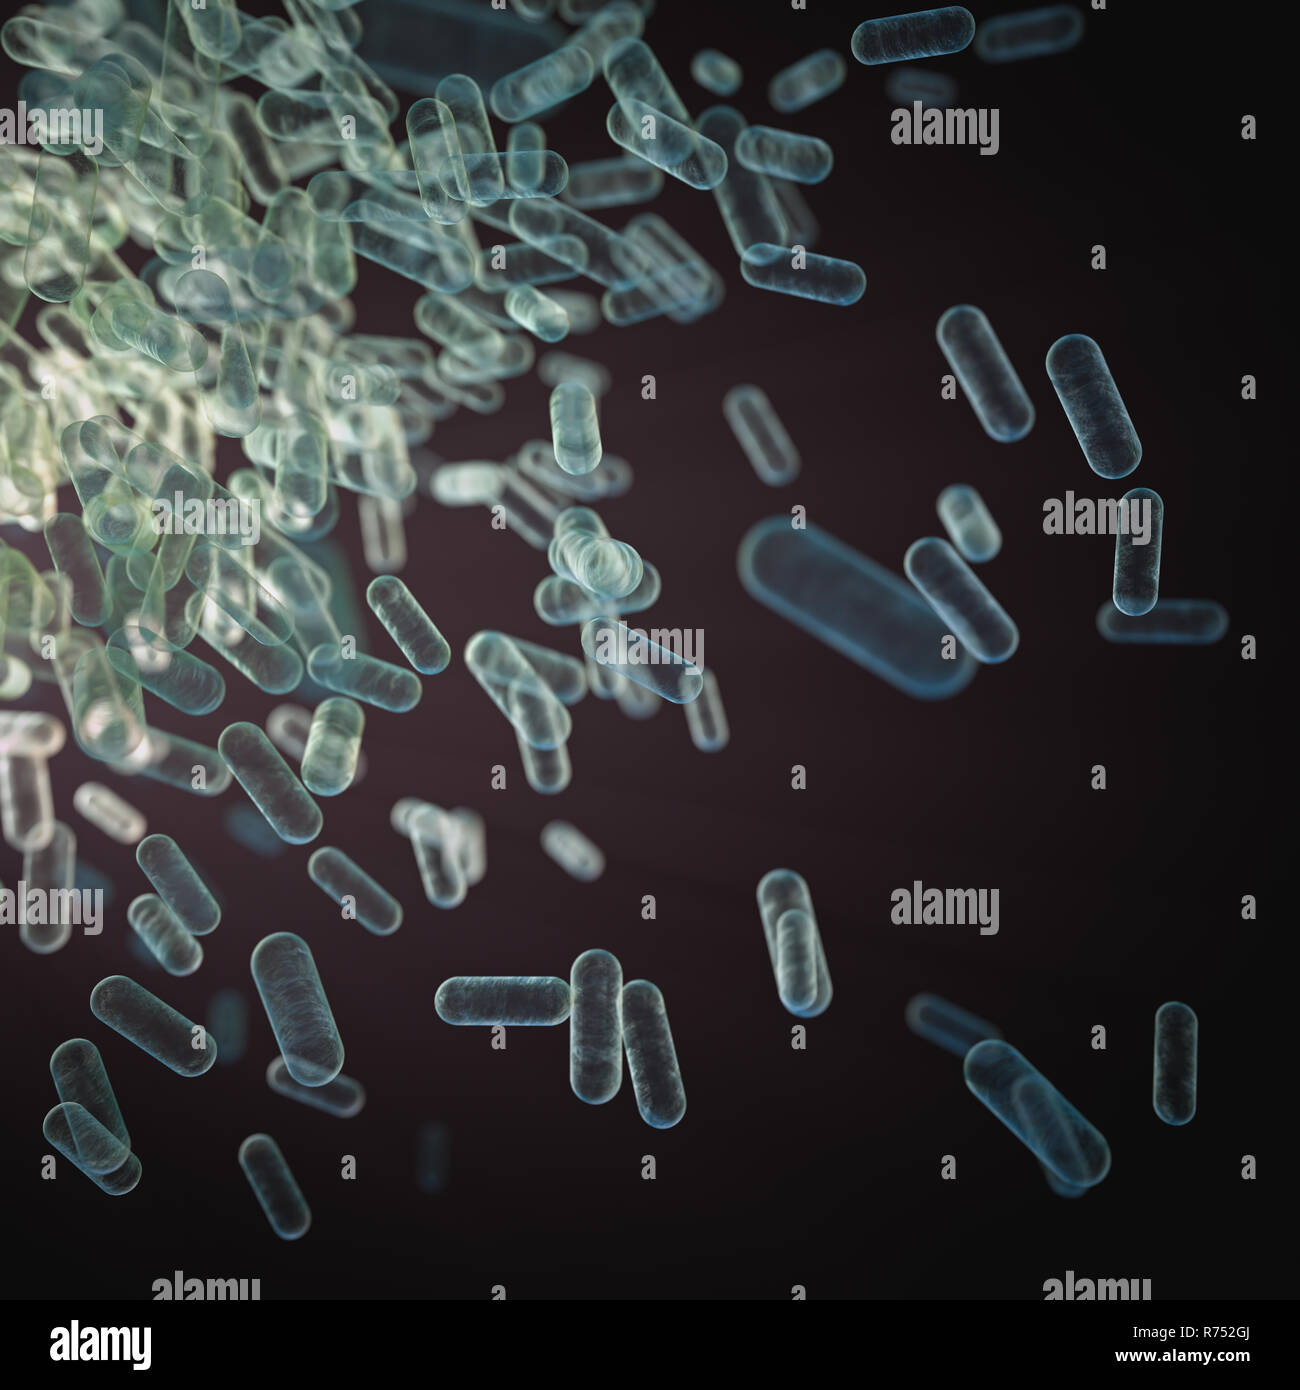 3D illustration. Background image, abstract concept of microscopic life, virus and bacteria. Stock Photo